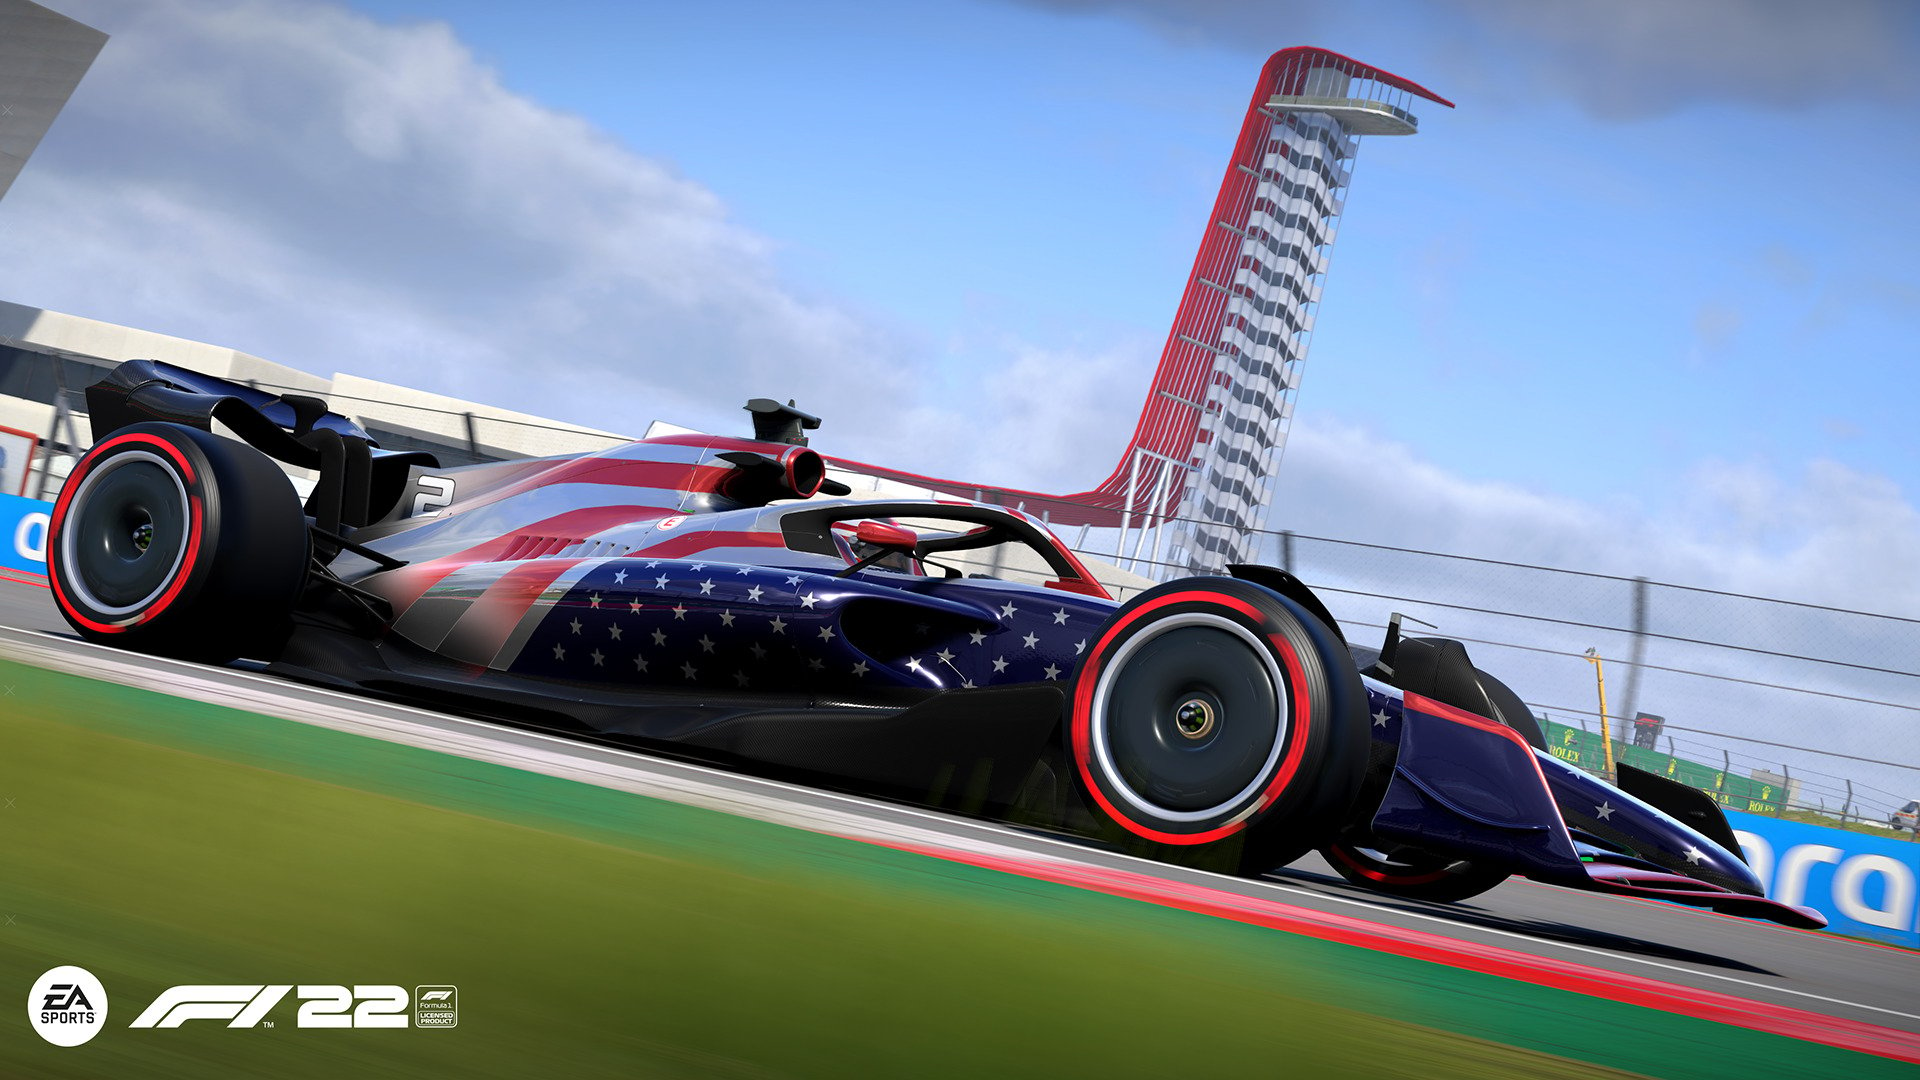 F1 22 is Free to Play This Weekend, and You Can Win the Chance to Meet Daniel Ricciardo